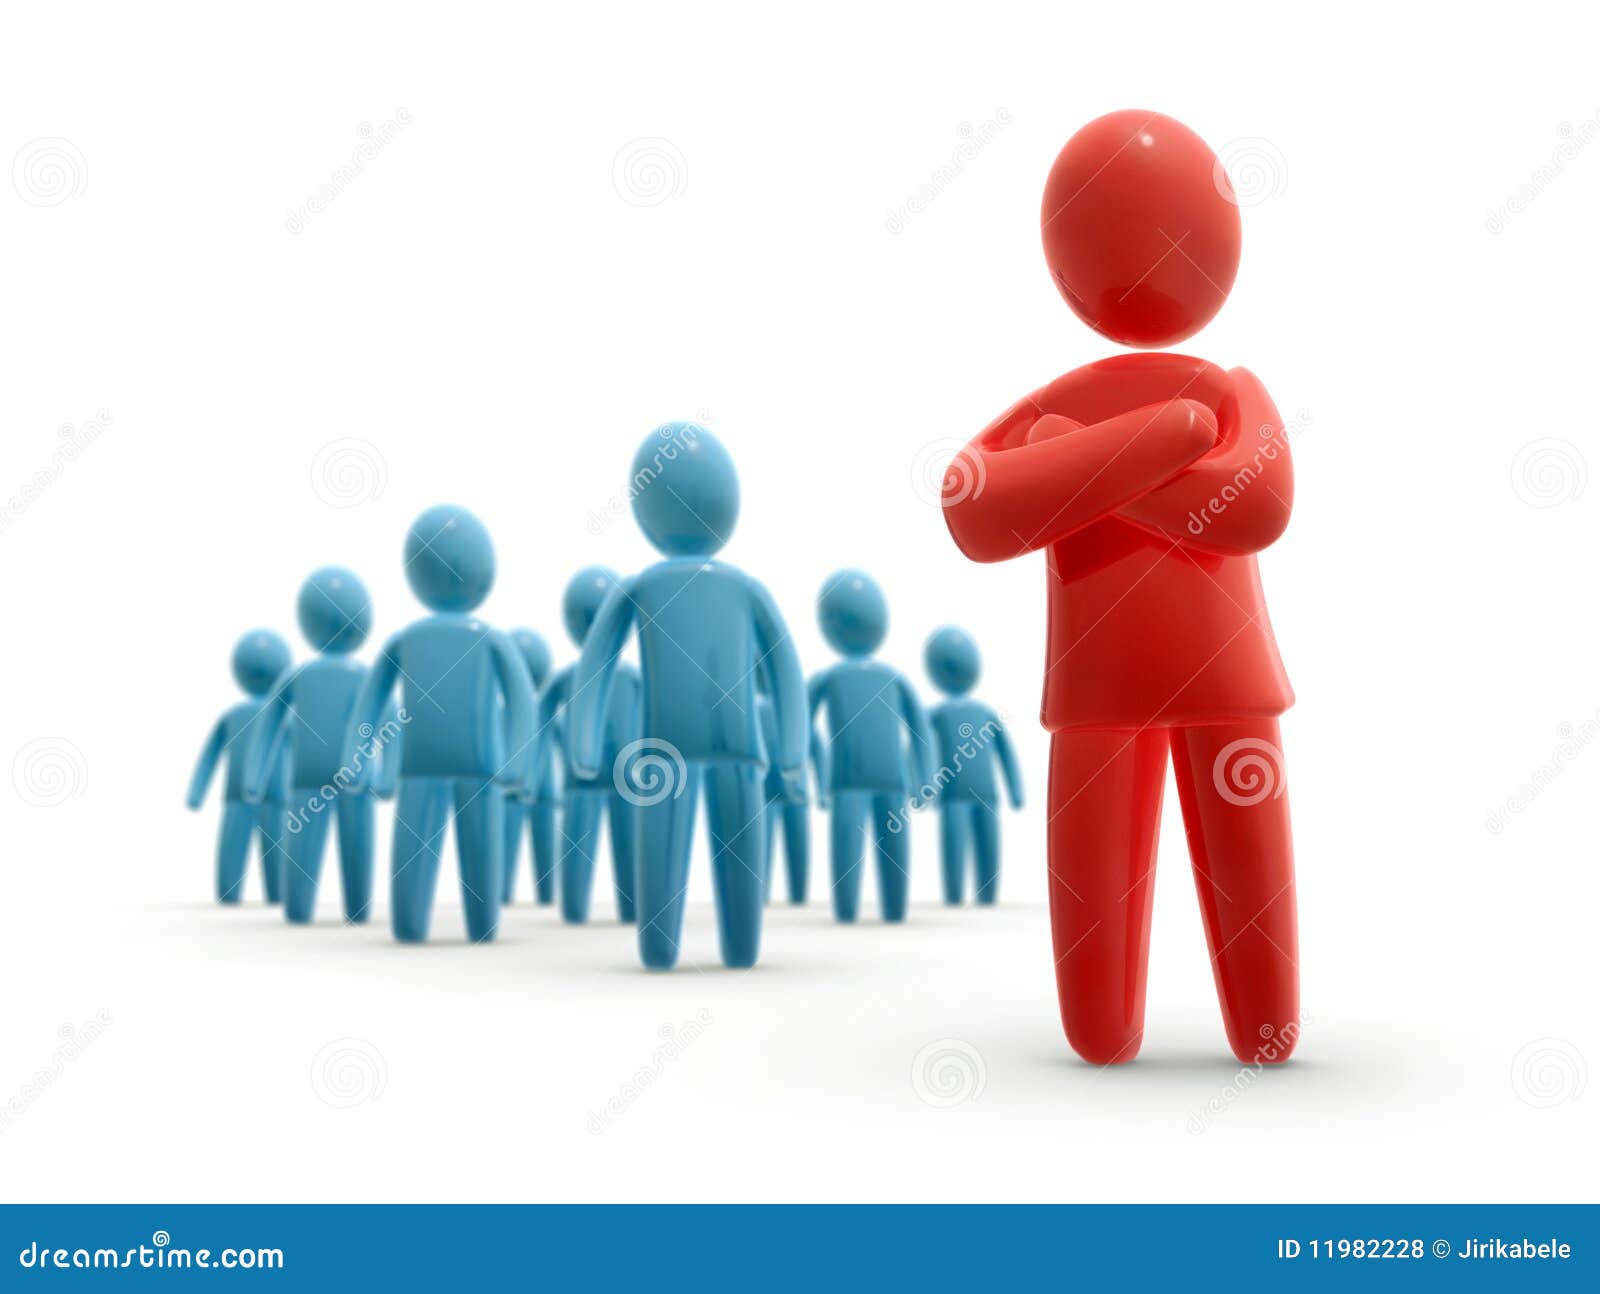 free clipart images leadership - photo #42